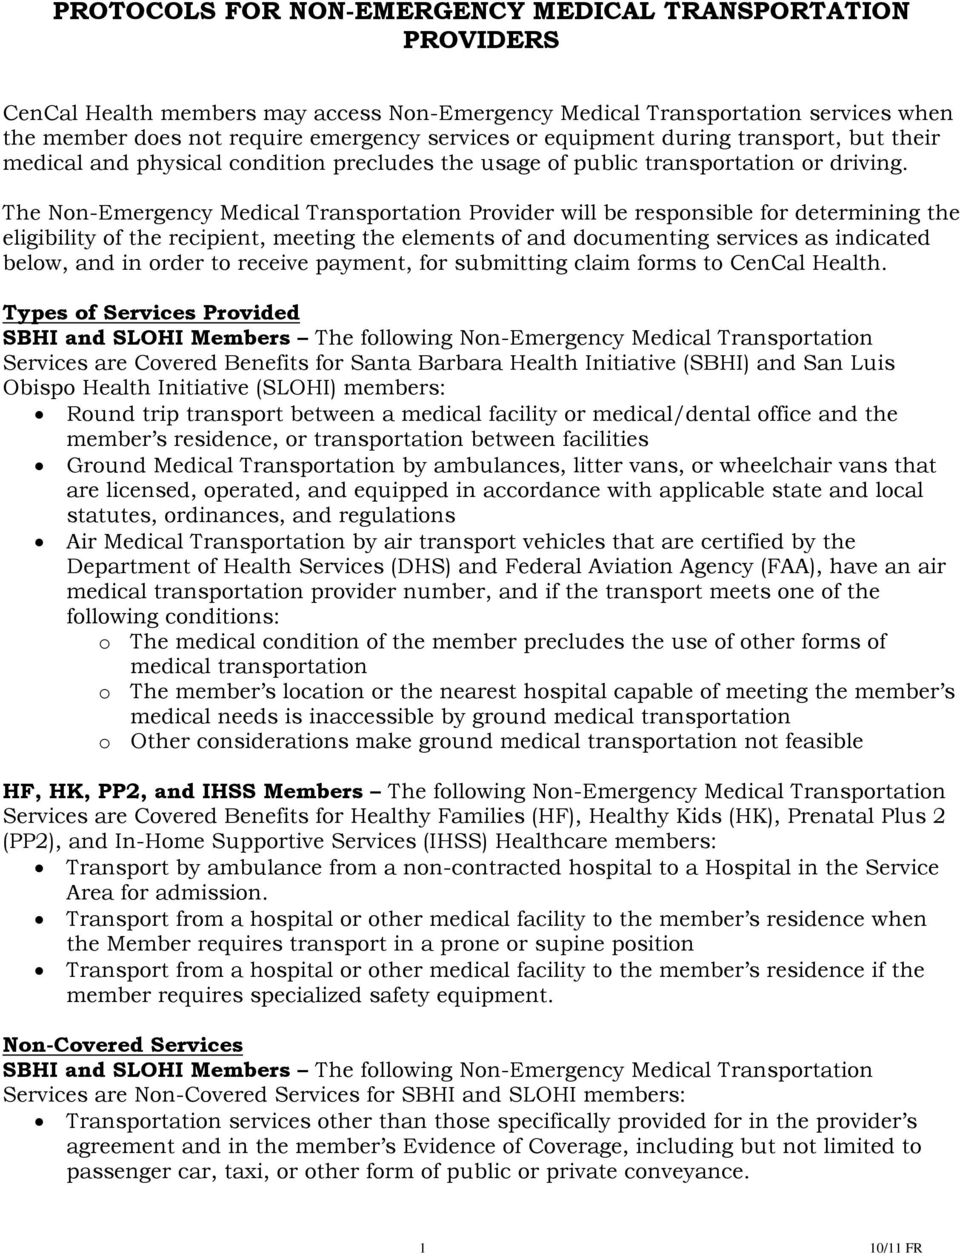 The Non-Emergency Medical Transportation Provider will be responsible for determining the eligibility of the recipient, meeting the elements of and documenting services as indicated below, and in